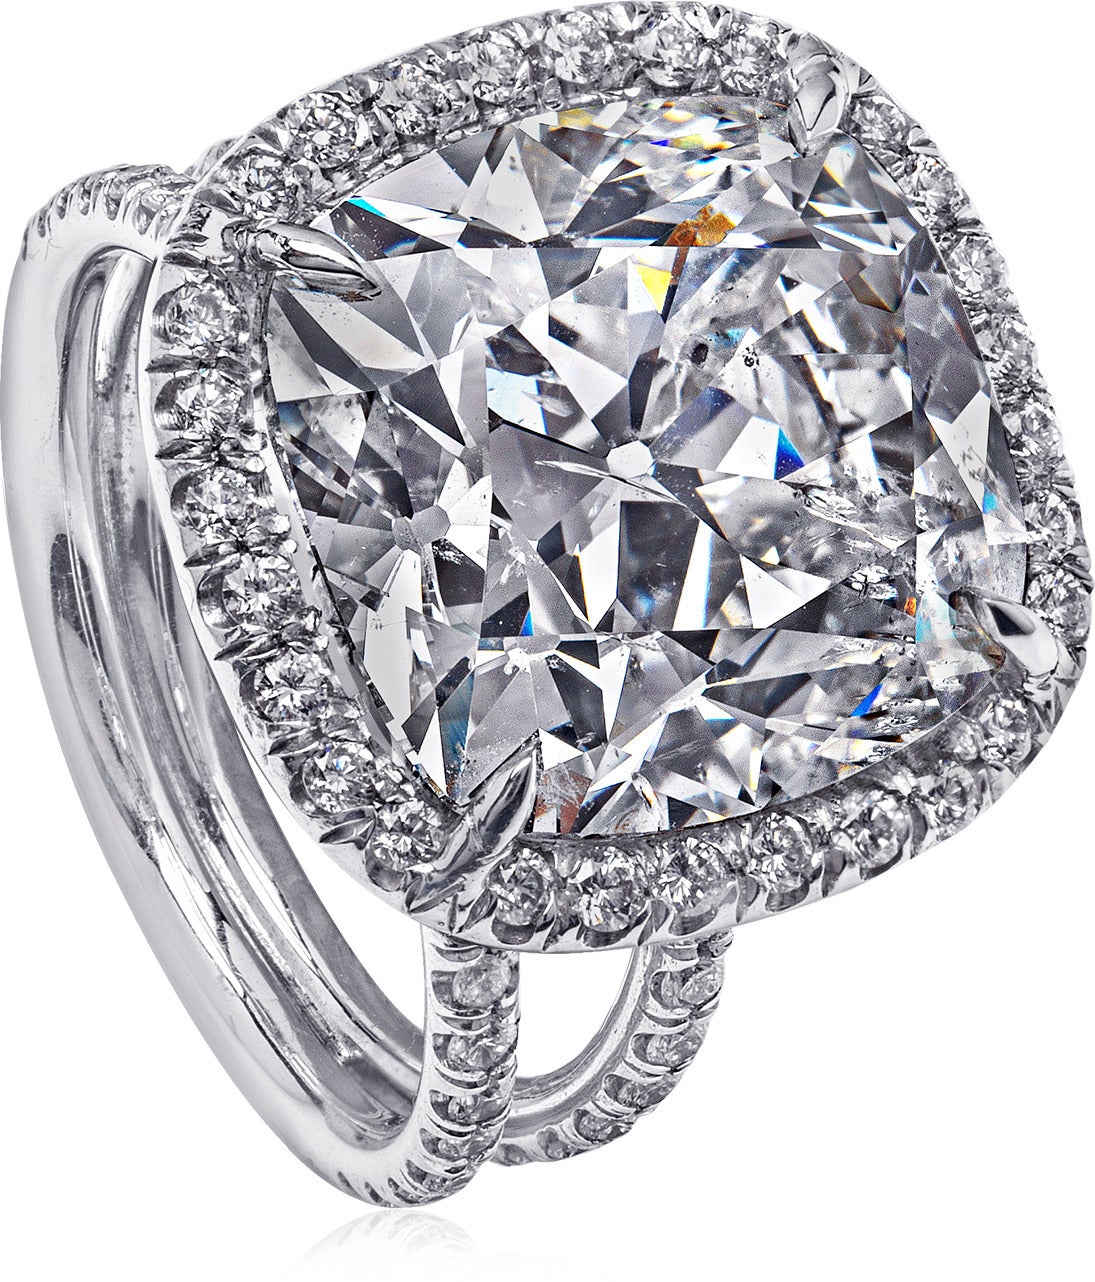 This diamond ring was made to look large.  Over 8 carat center cushion, set with a halo around to make the circumference even larger.  The center diamonds details are J color, I1 clarity.